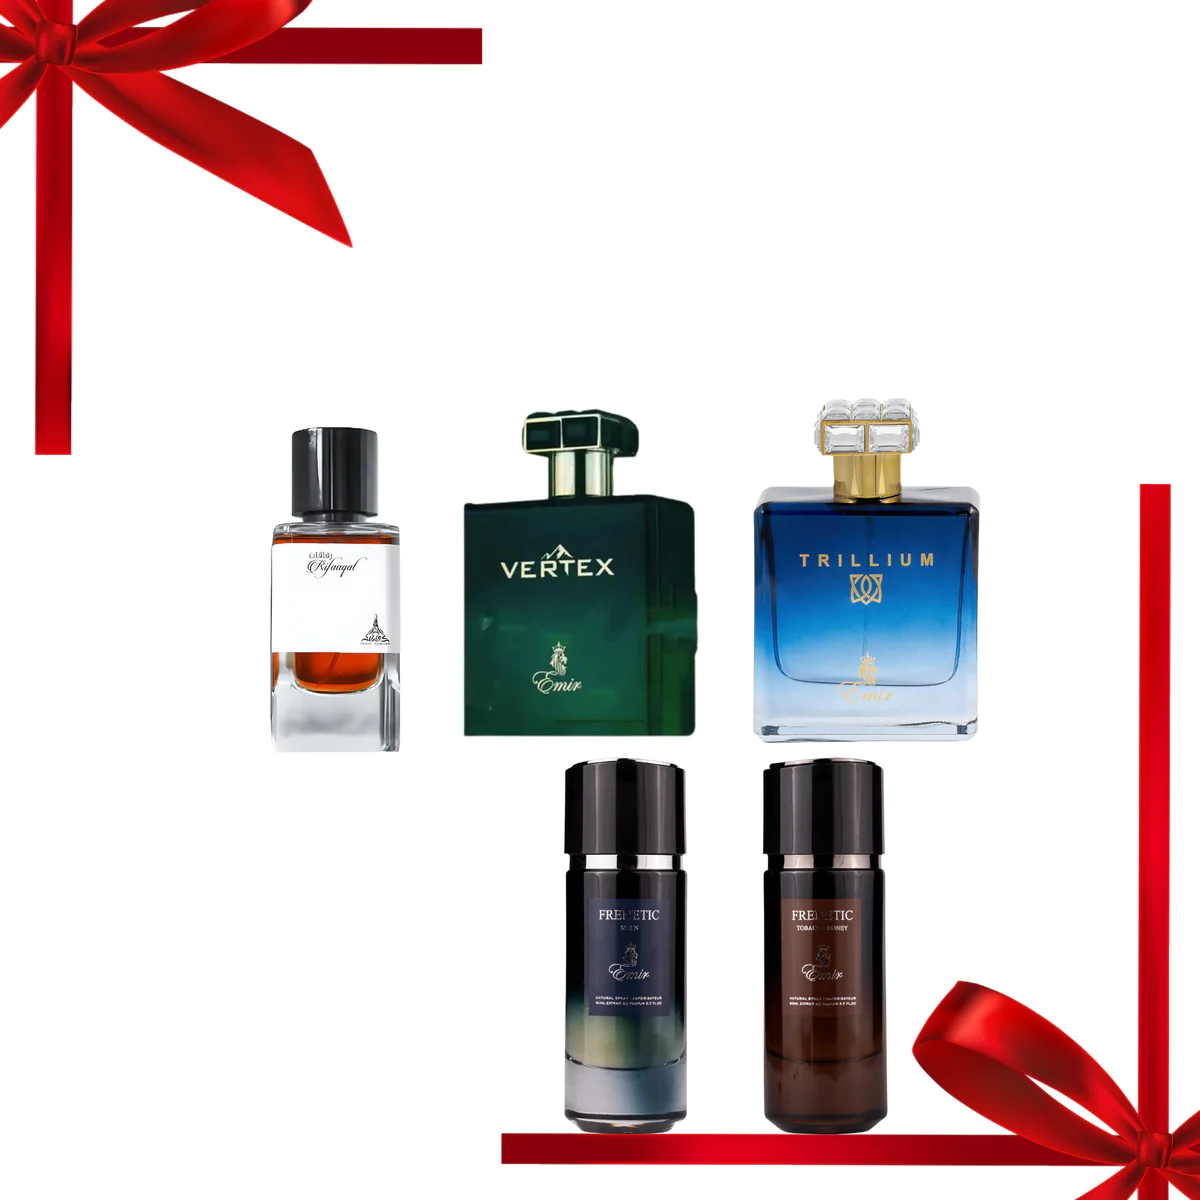 EMIR Unisex Perfume Collection Pack of 5 With Free Gift Set